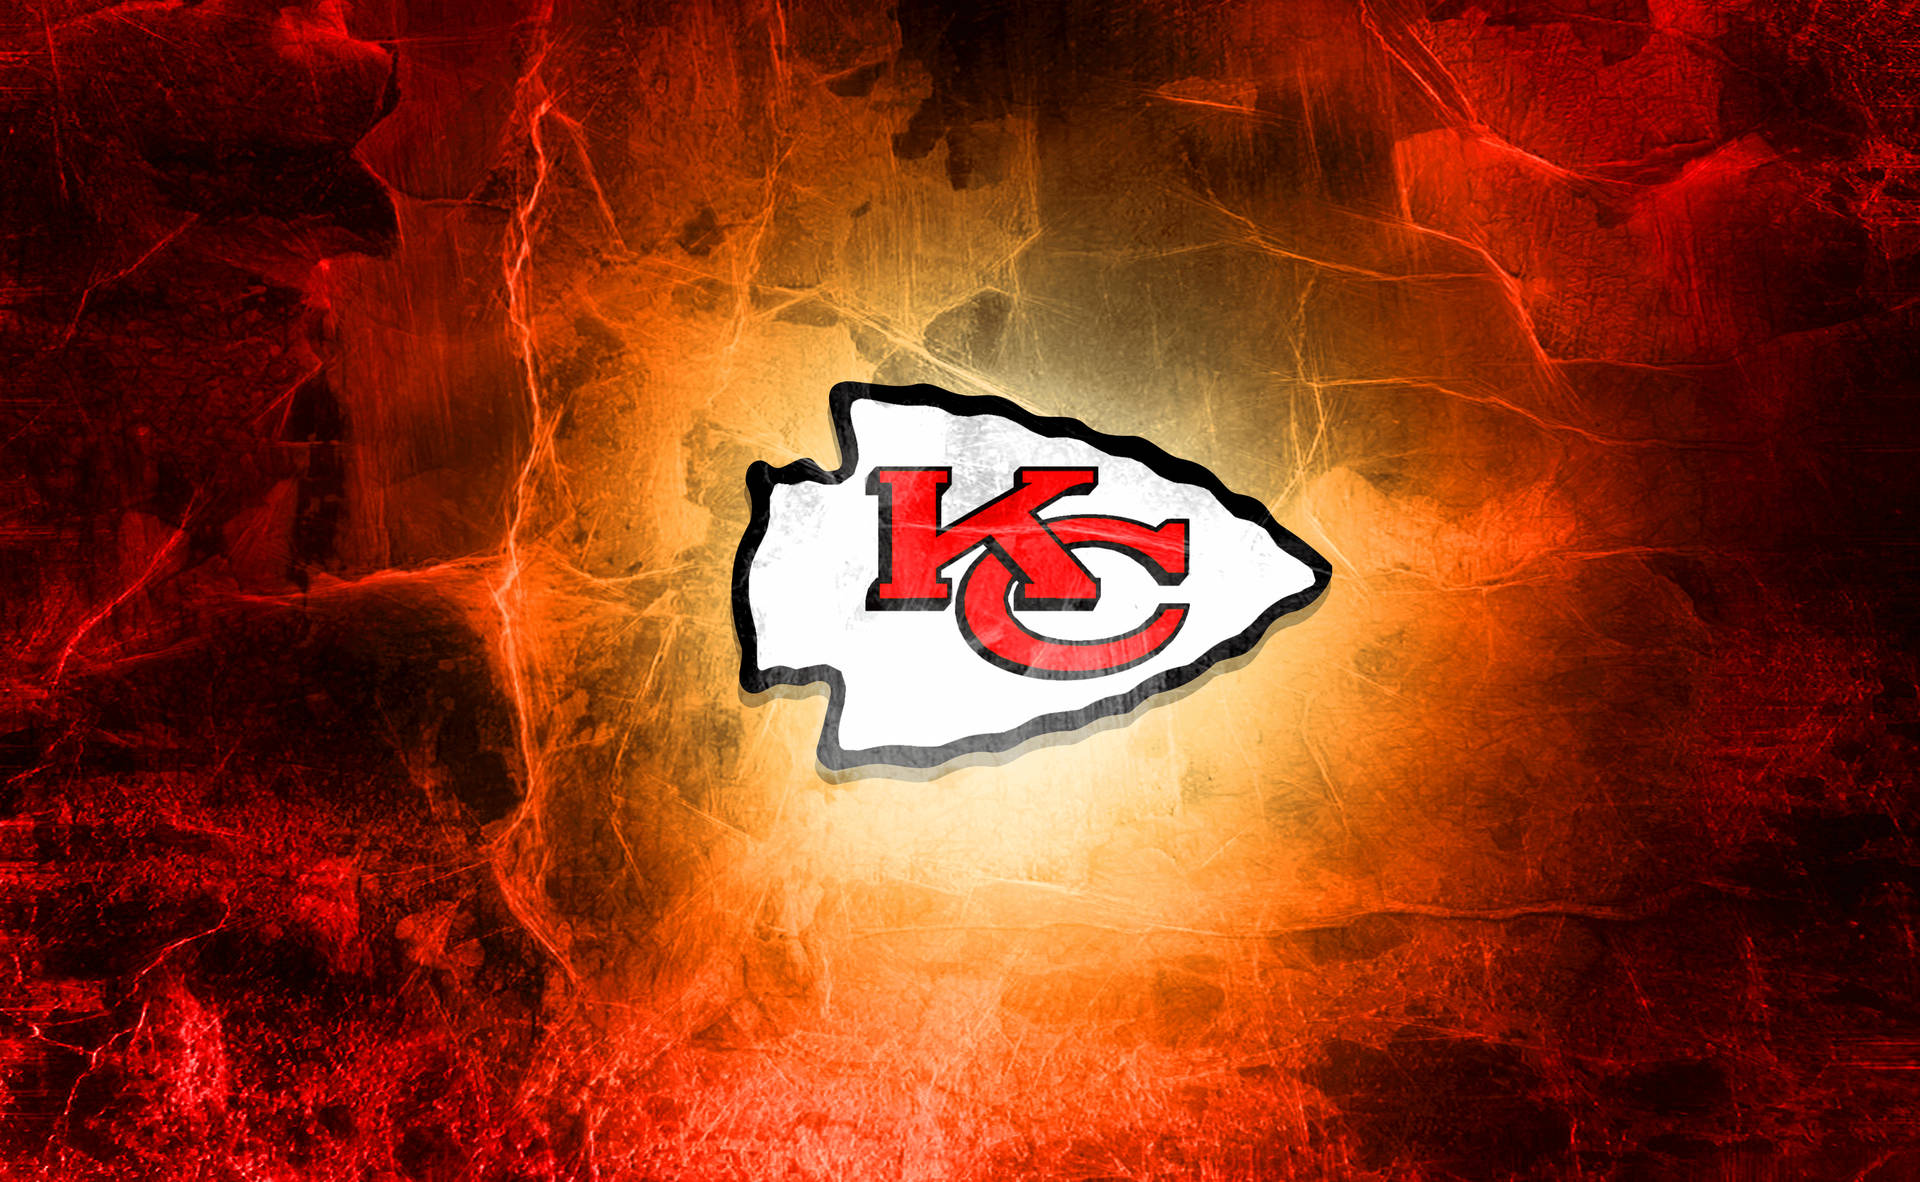 Go Chiefs! Show your team spirit with this vibrant Kansas City Chiefs cool logo wallpaper. Wallpaper